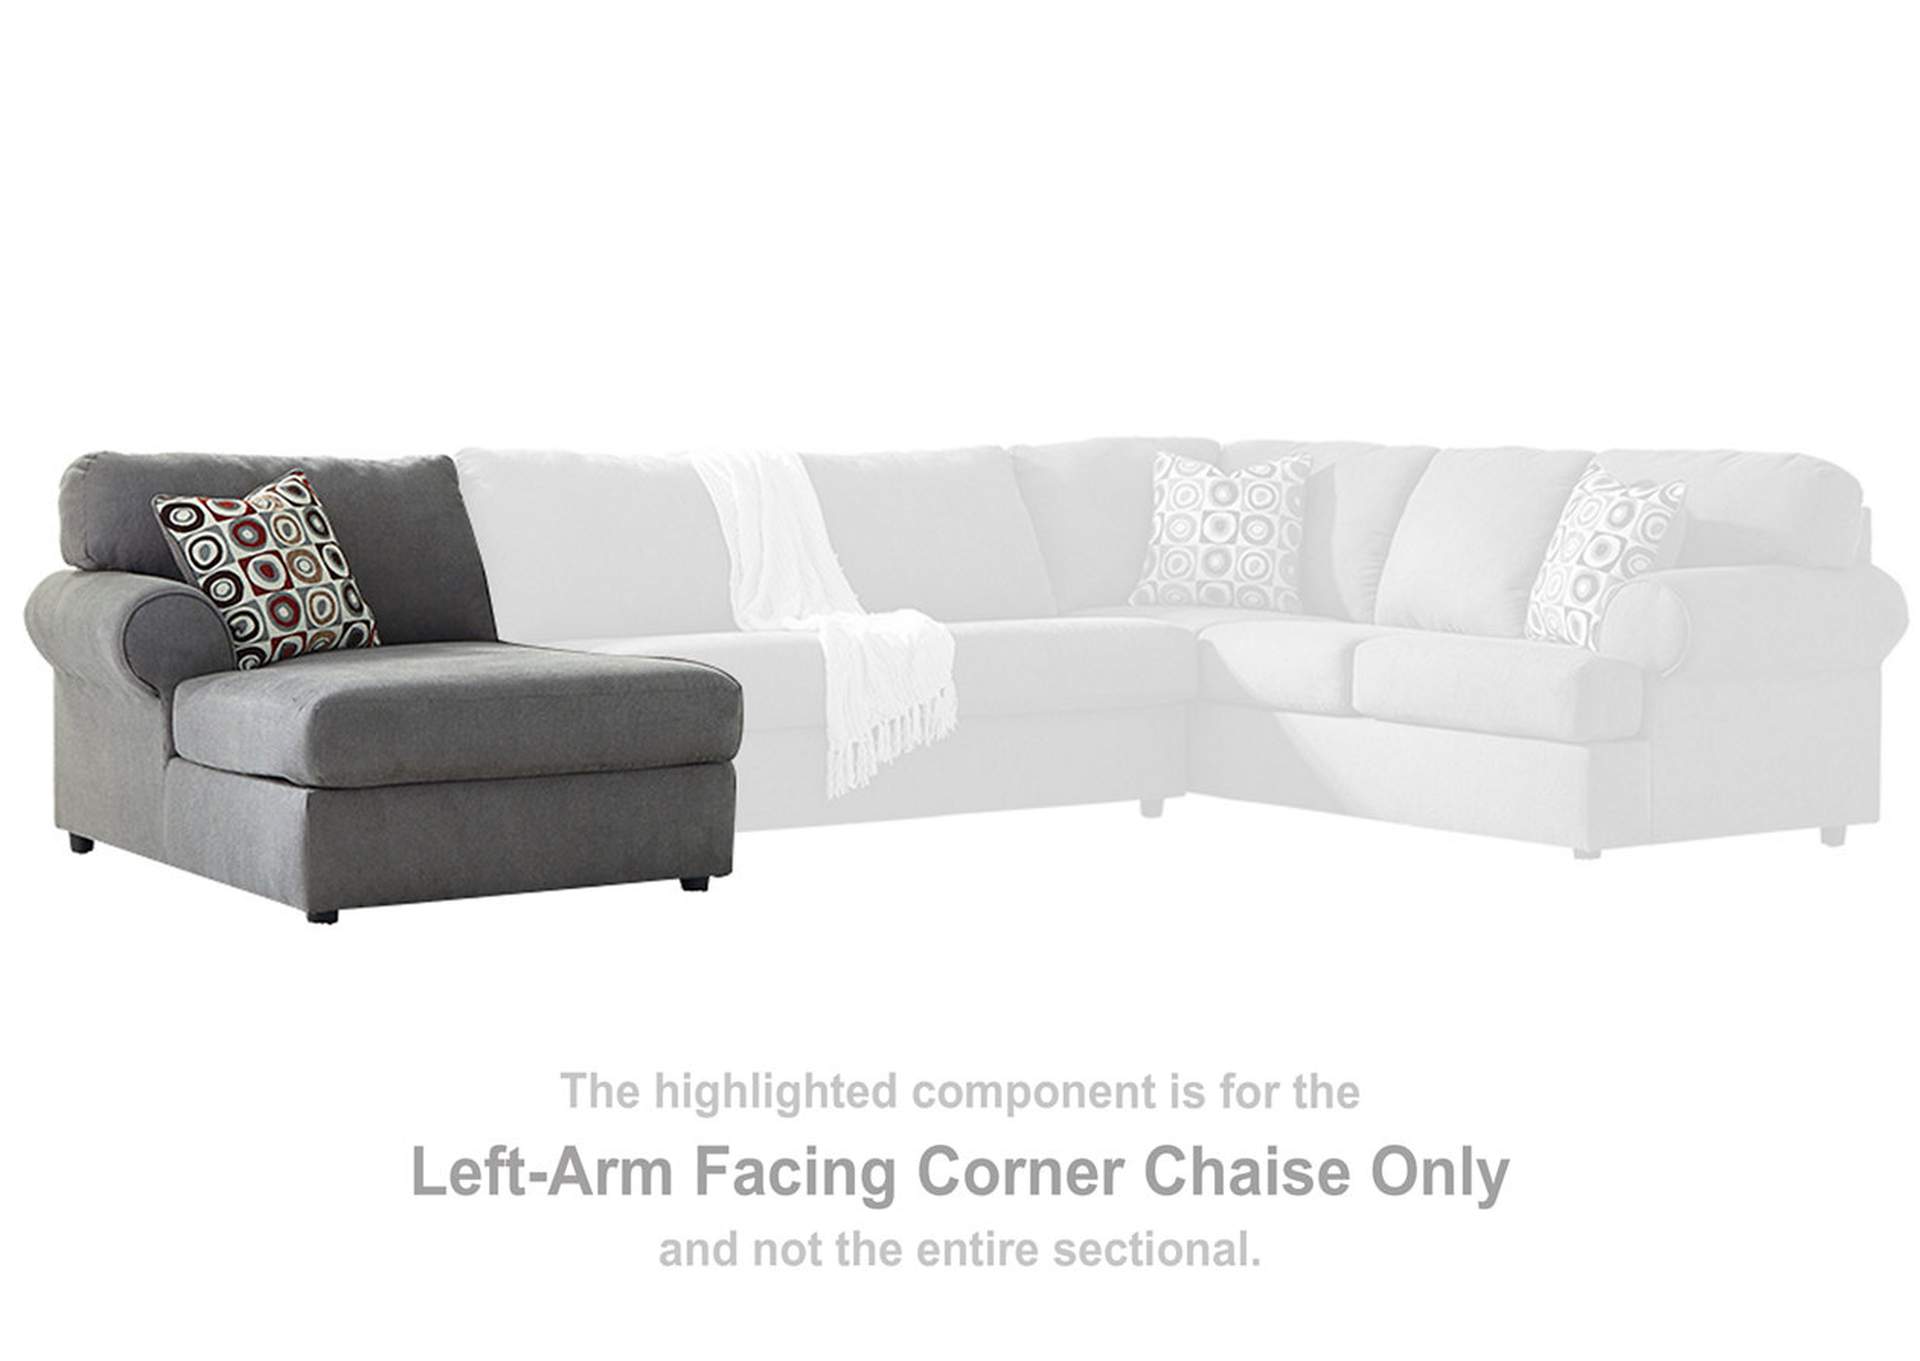 Jayceon 3-Piece Sectional with Chaise,Signature Design By Ashley